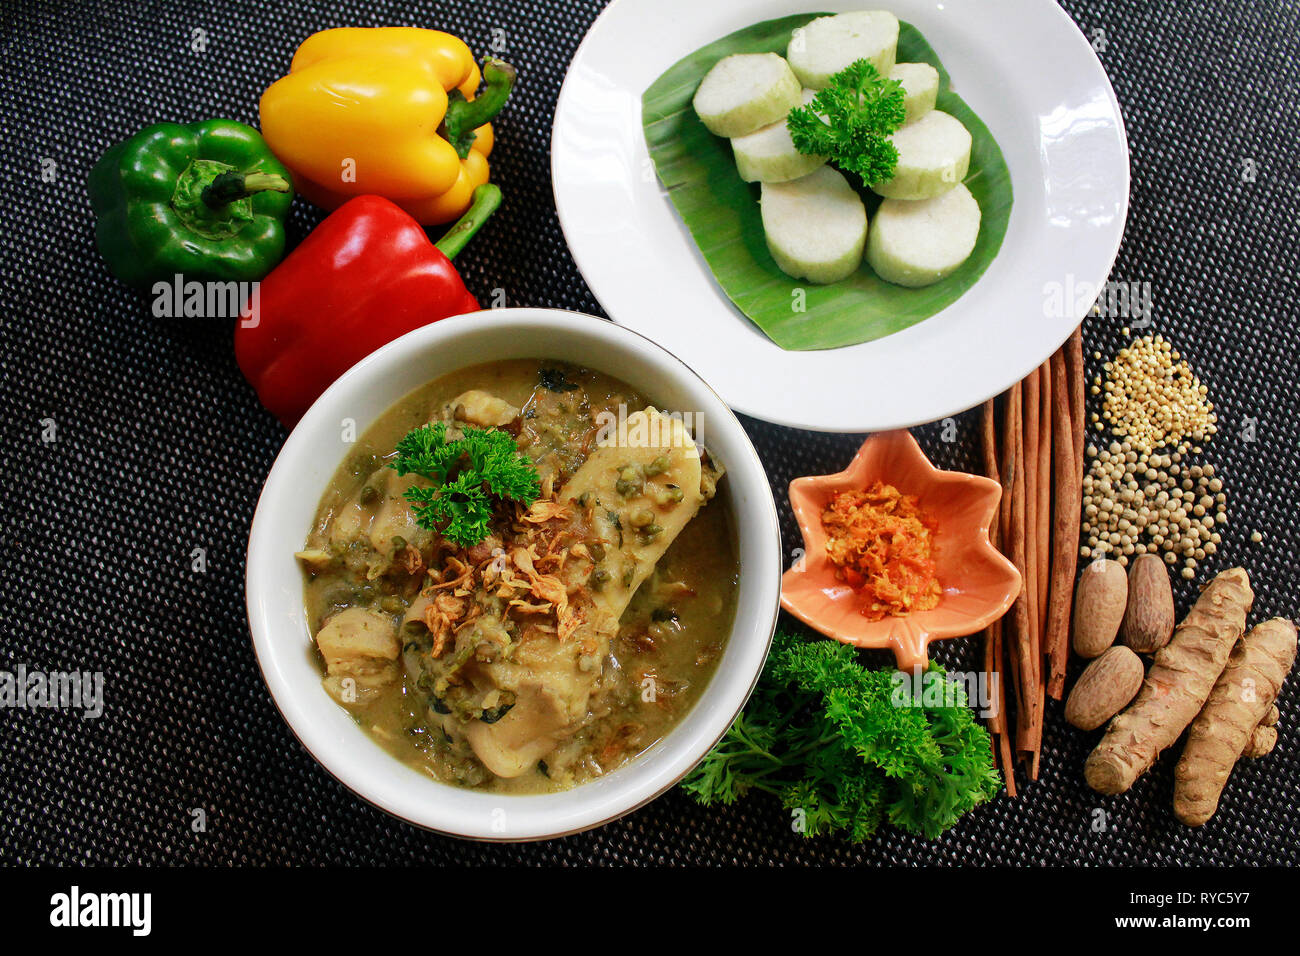 Gnarly Broth or Kaldu Kokot in bahasa Indonesia. Food from Sumenep, Madura Island - Indonesia. Made with beef & cow's foot and green beans. With lonto Stock Photo